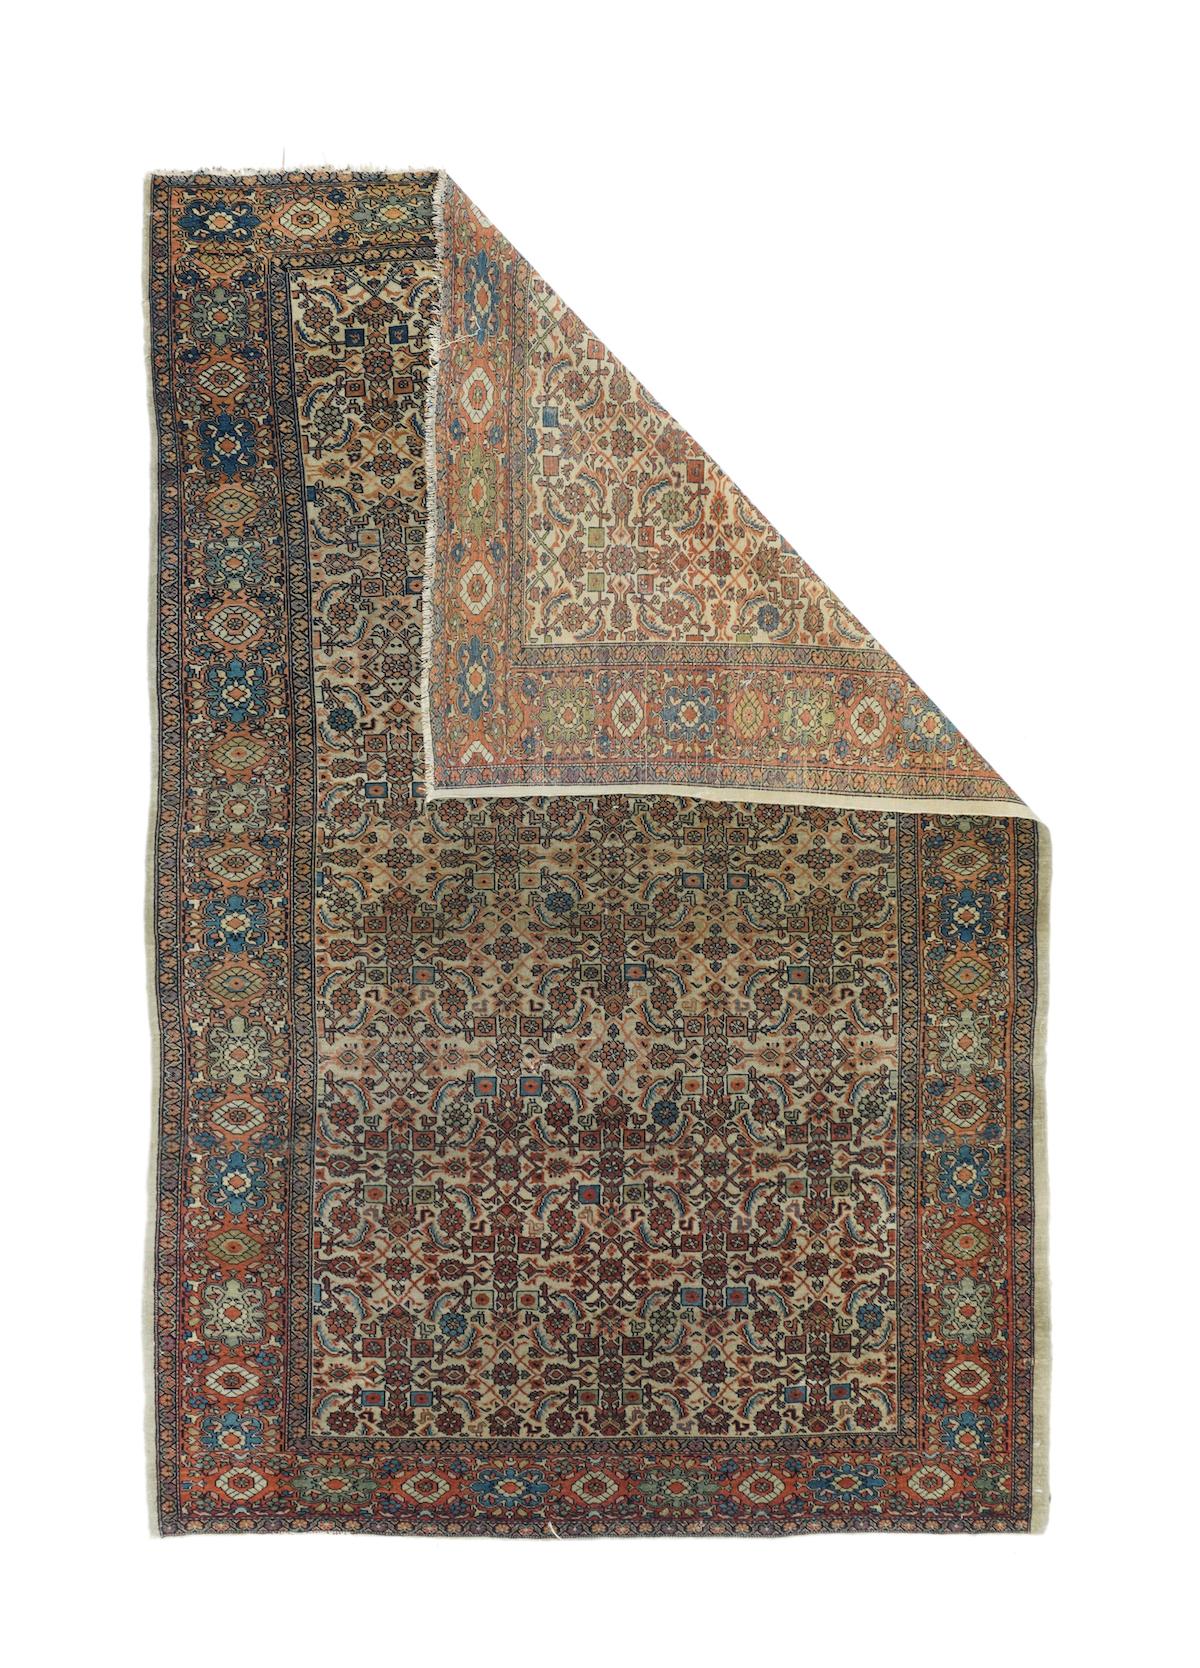 Antique Farahan Sarouk Rug 4'7'' x 6'10''. This antique west Persian village scatter features an straw-ecru field totally covered with a medium-scale Herati design. The coral border shows lobed octofoils and oval petal rosettes, with fine supporting